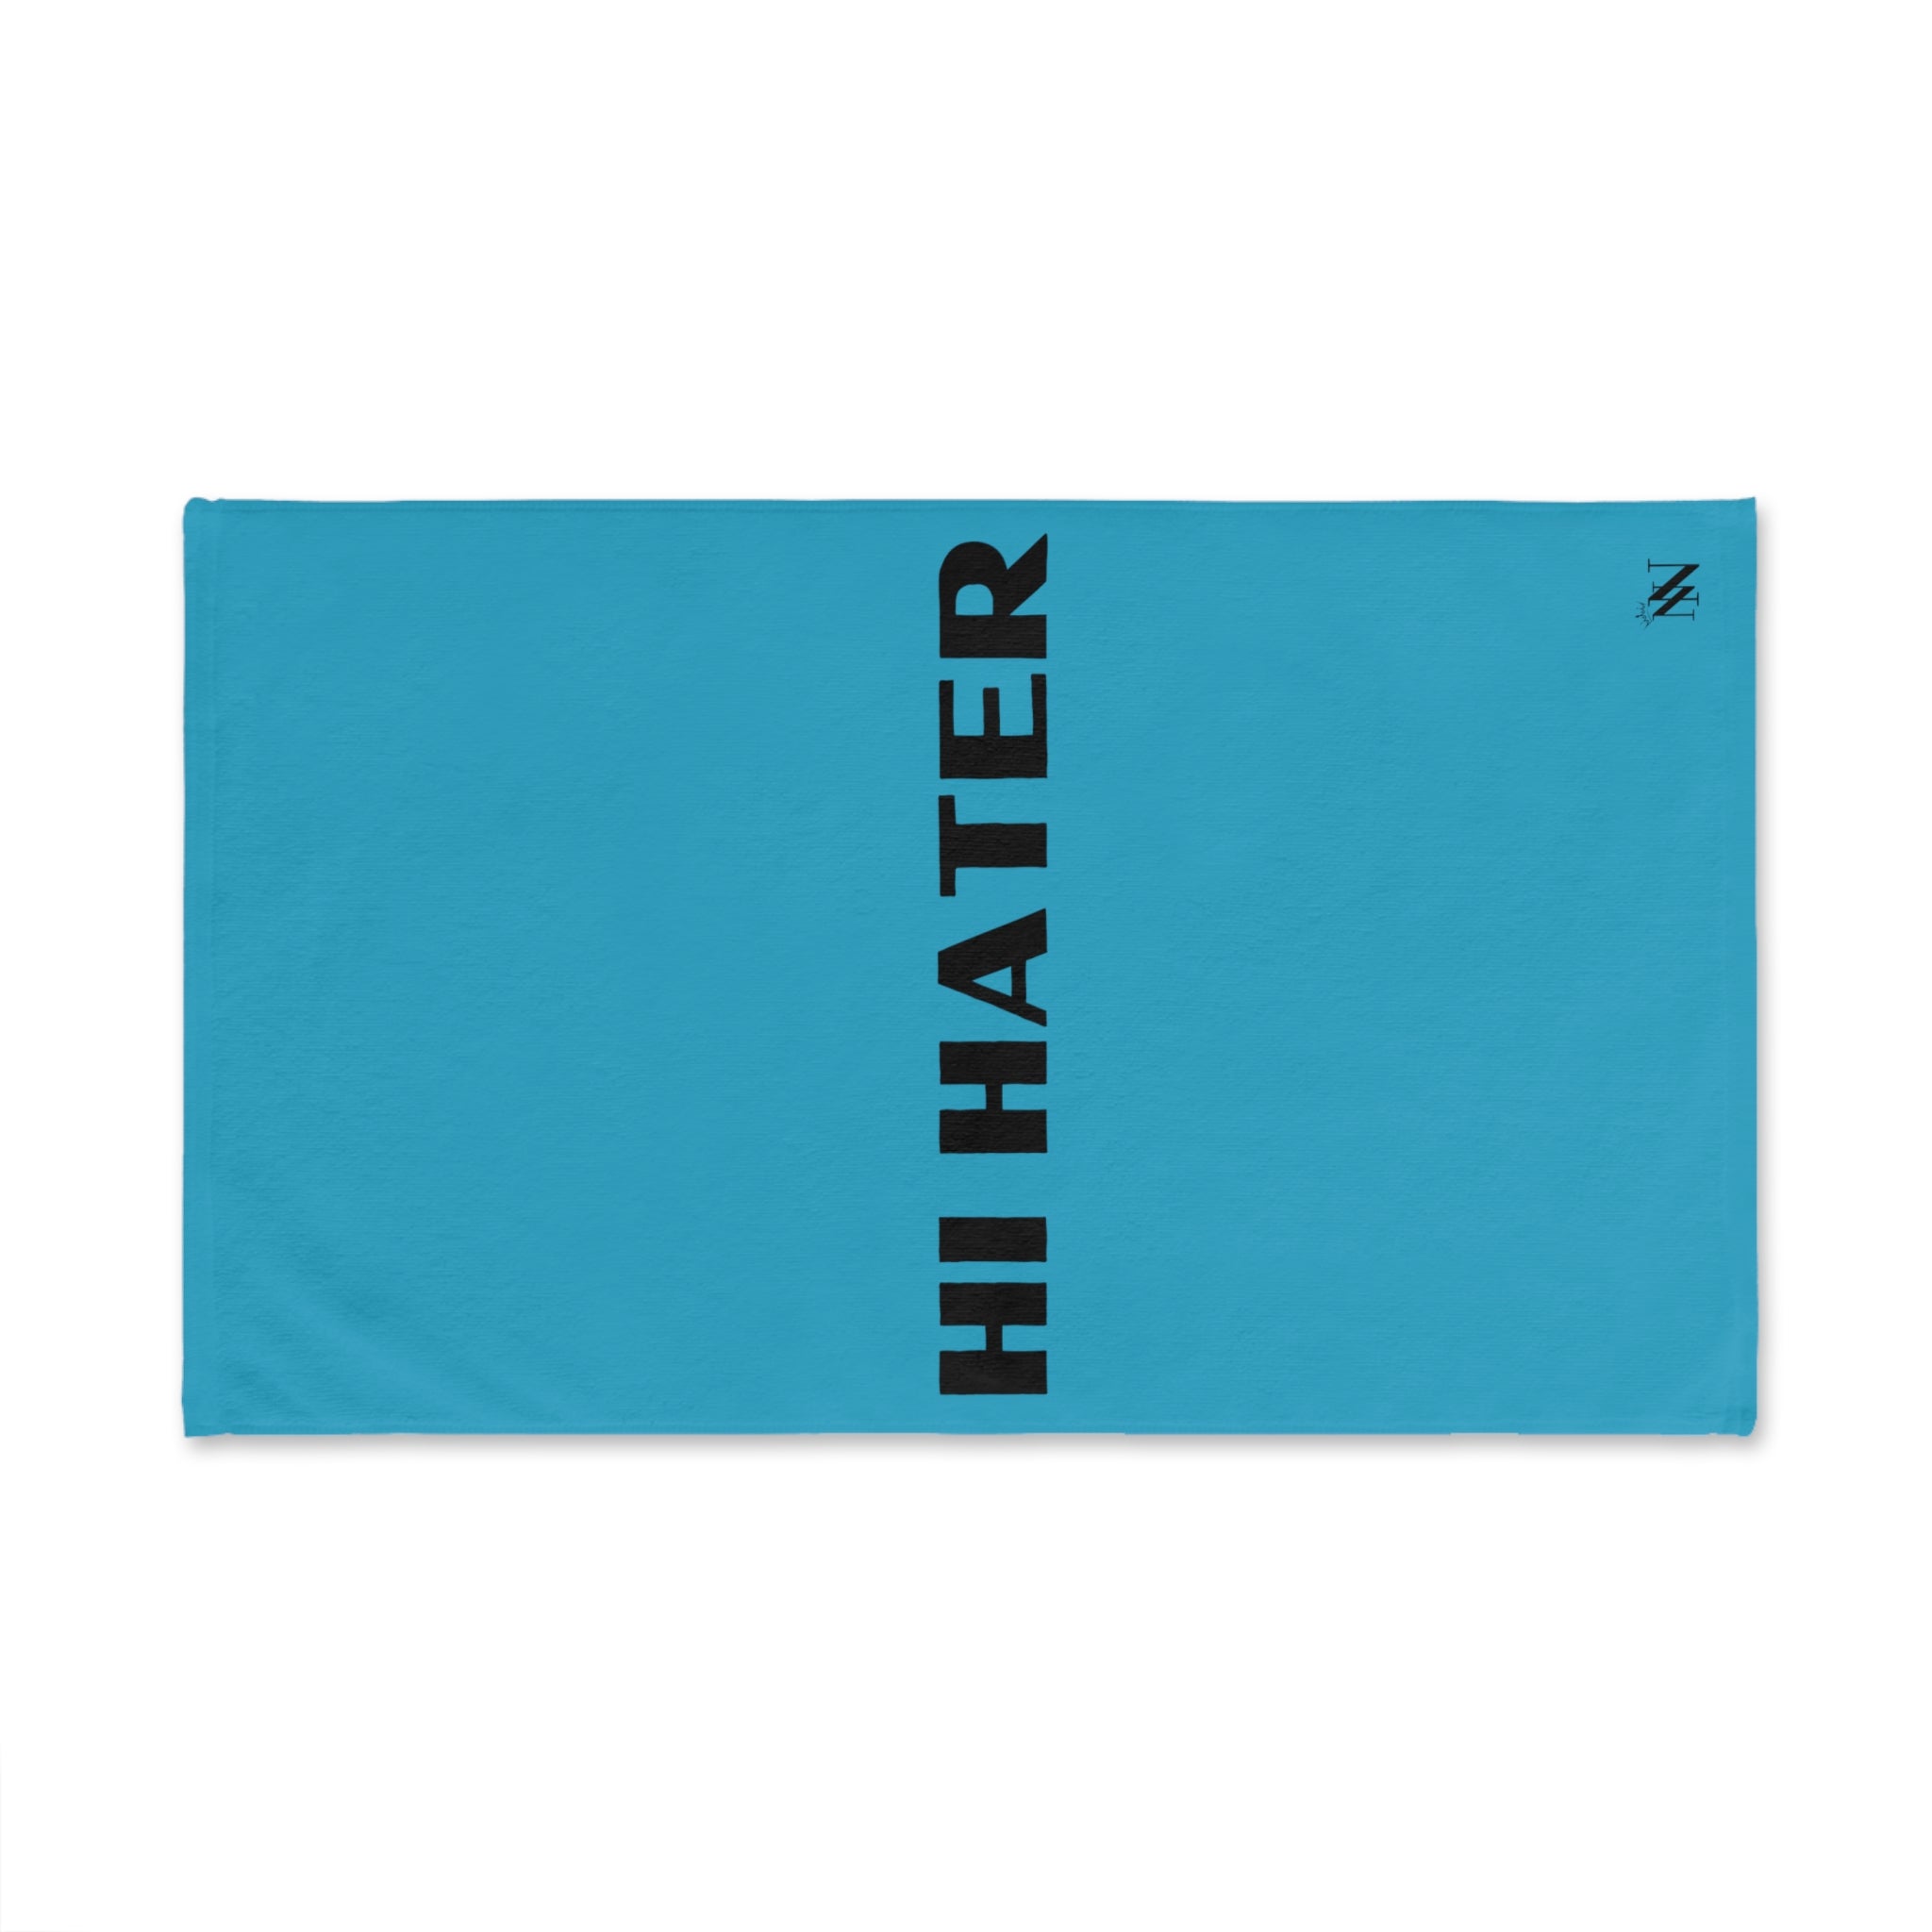 Hi Hater Fun Print Teal | Novelty Gifts for Boyfriend, Funny Towel Romantic Gift for Wedding Couple Fiance First Year Anniversary Valentines, Party Gag Gifts, Joke Humor Cloth for Husband Men BF NECTAR NAPKINS